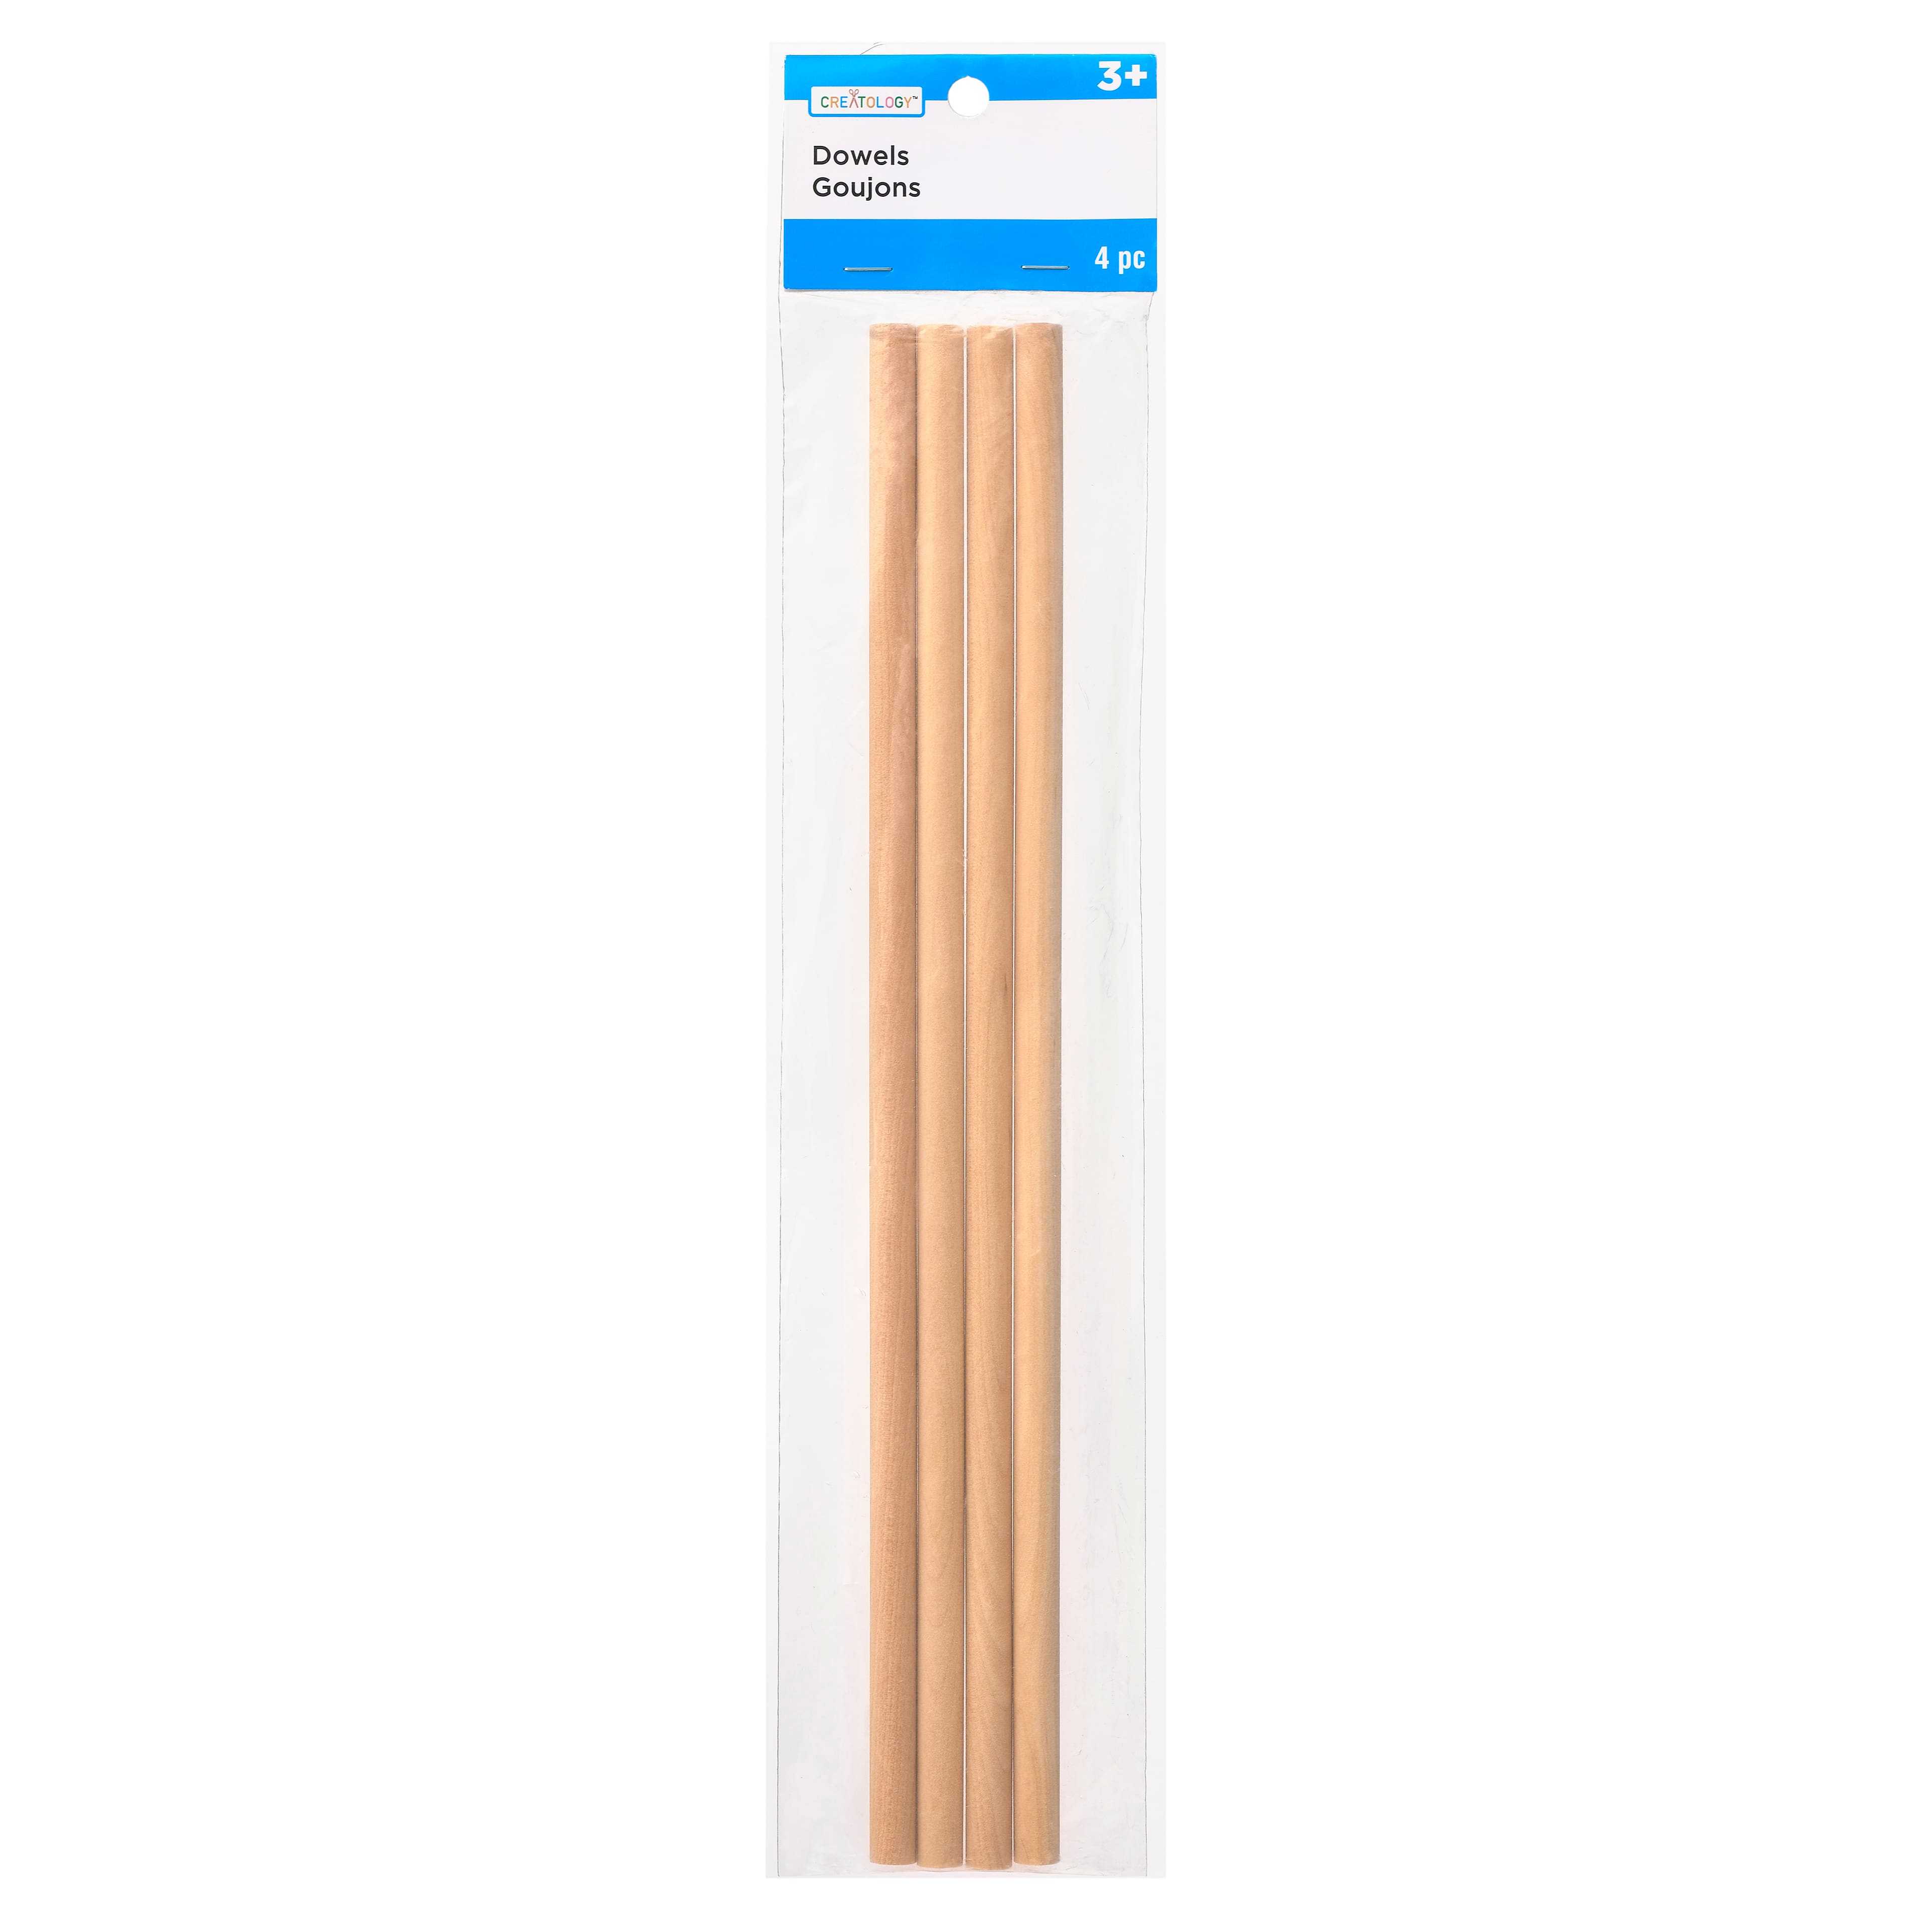 12 Packs: 4 ct. (48 total) 3/8 x 12 Wooden Dowels by Creatology™